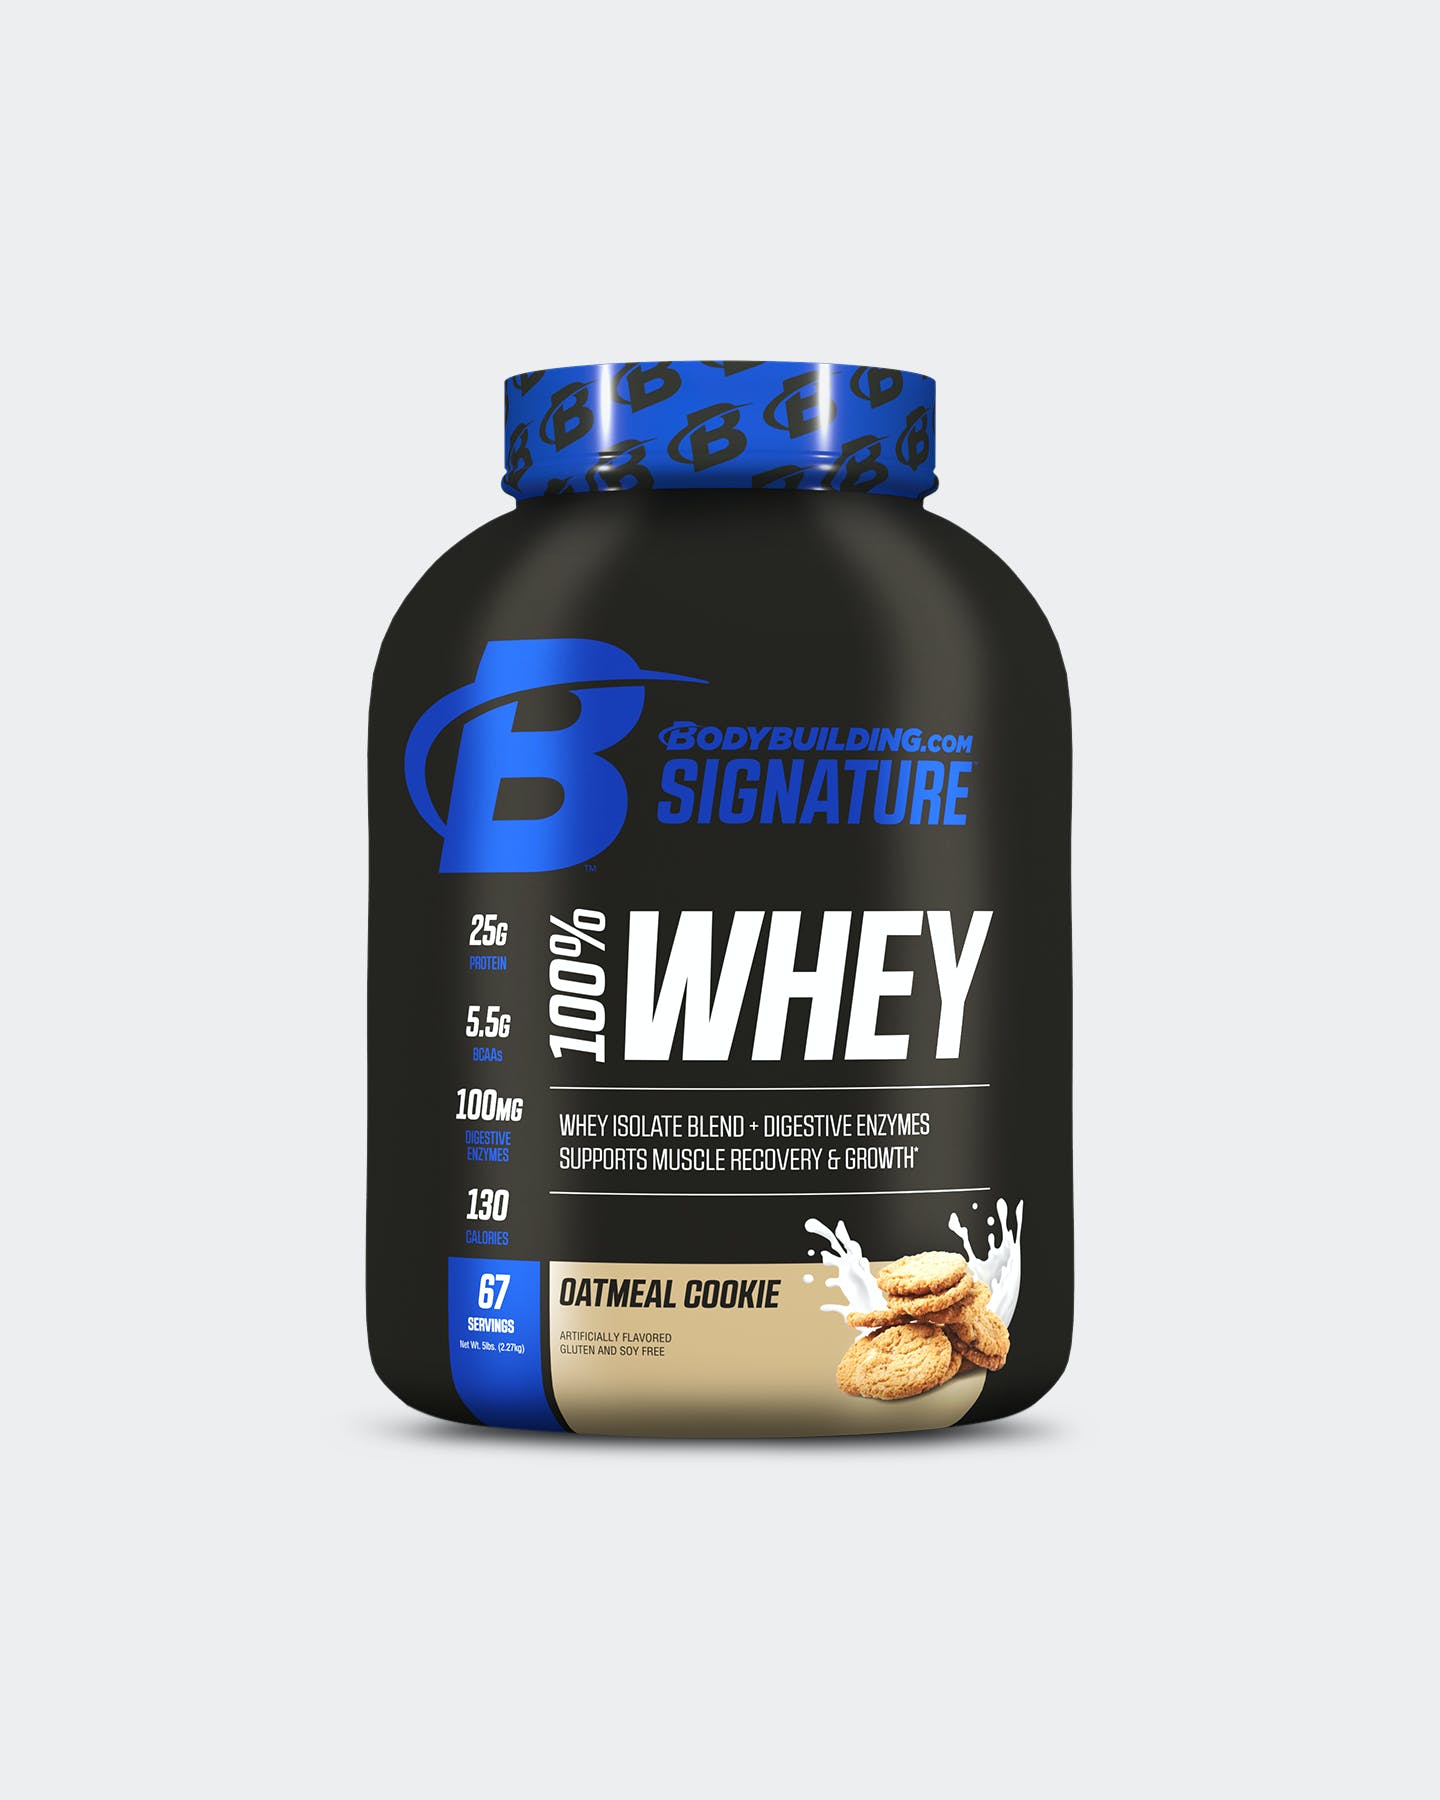 Bodybuilding.com Signature Signature 100% Whey Protein Powder, Oatmeal Cookie, 5 Lbs.